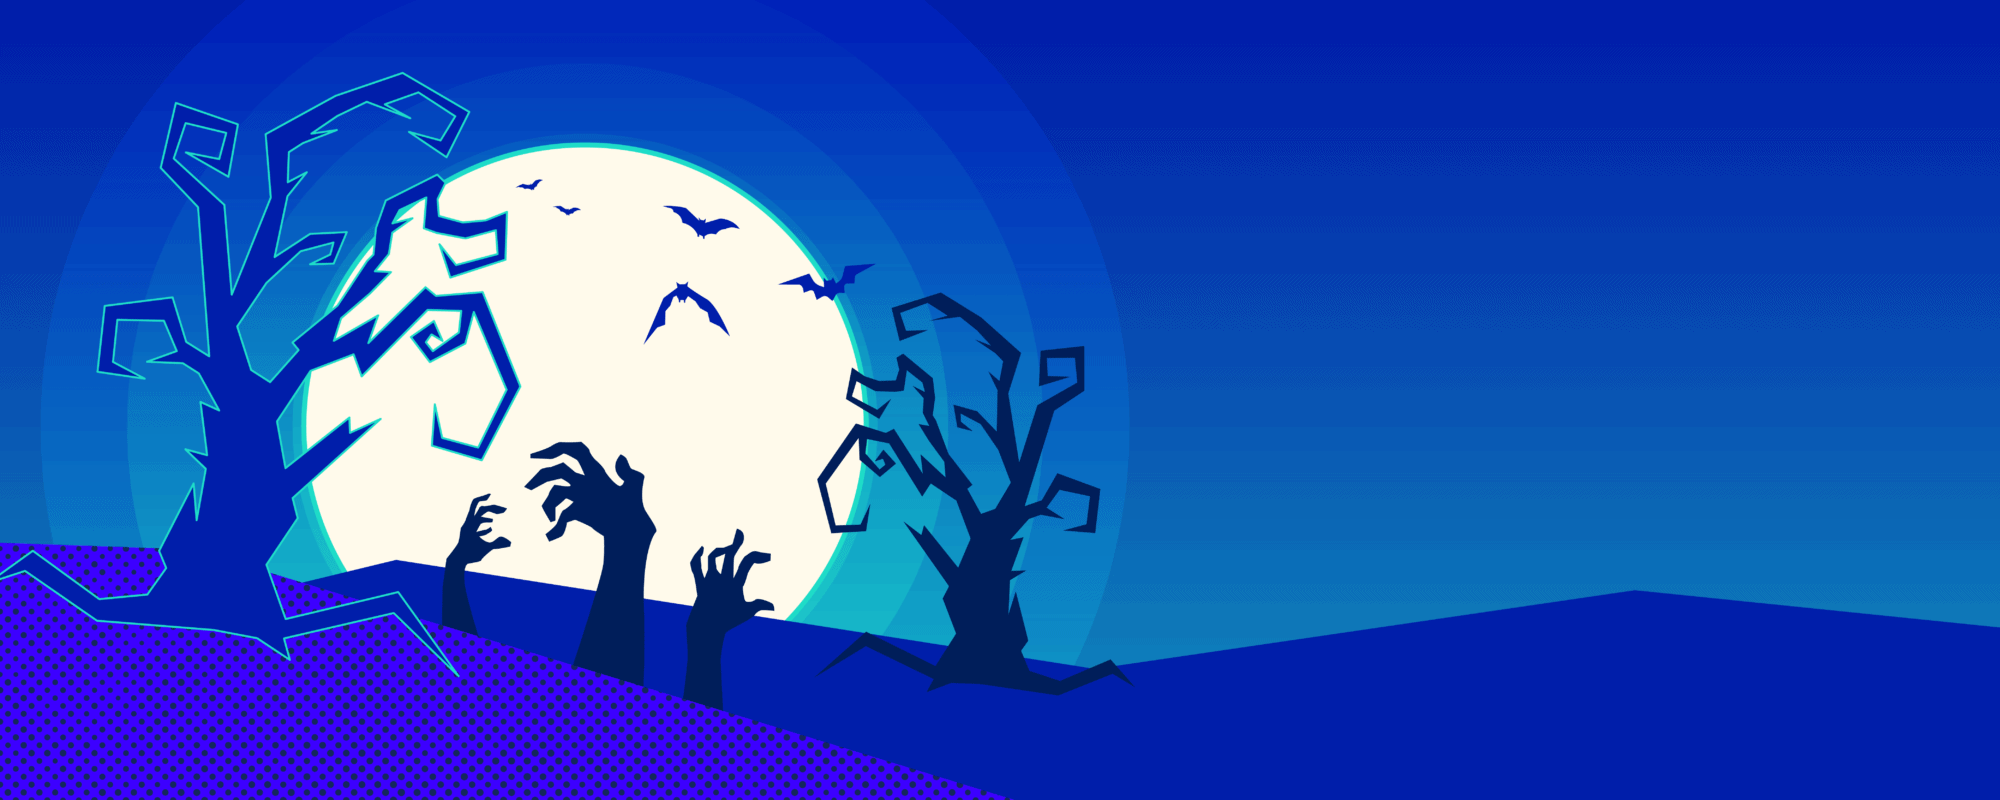 Header Image showing a spooky cartoon image with twisted trees and hand coming out of the ground with the moon in the background on a dark blue background.